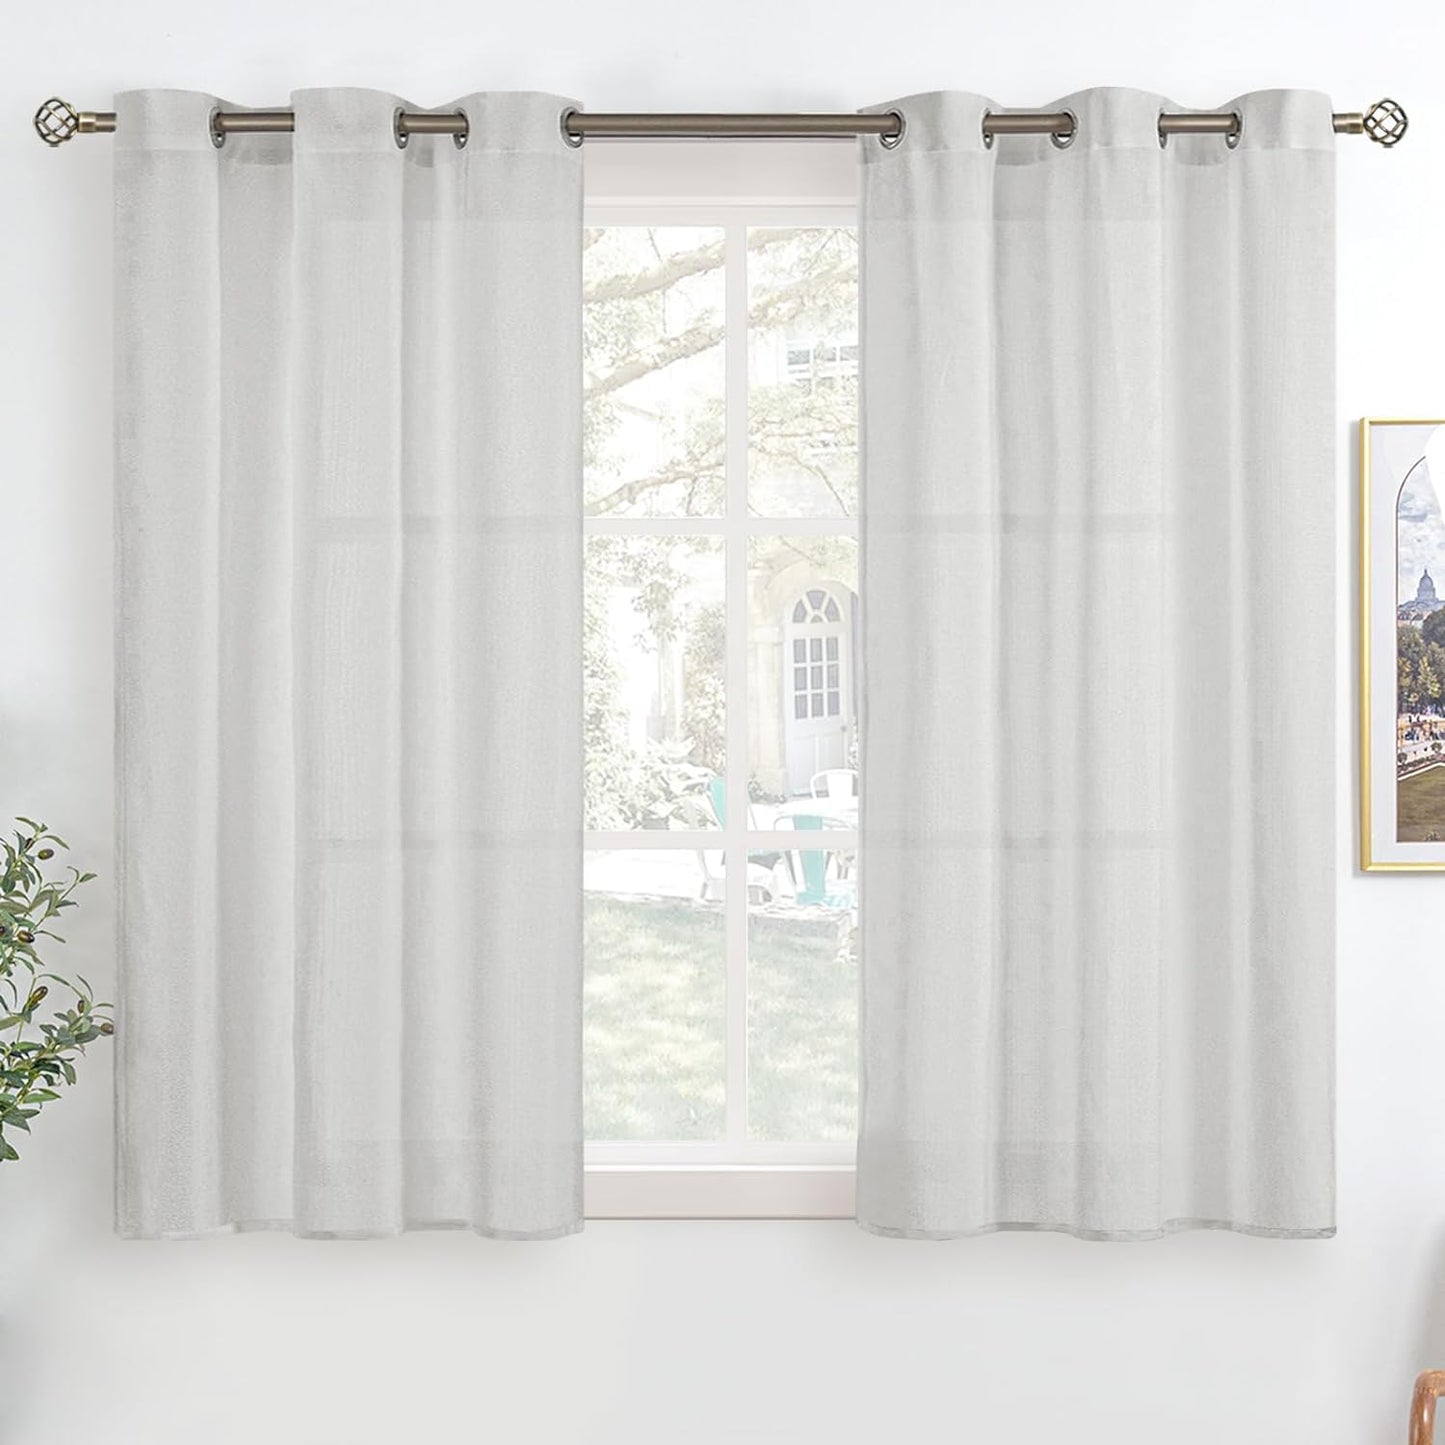 Bgment Natural Linen Look Semi Sheer Curtains for Bedroom, 52 X 54 Inch White Grommet Light Filtering Casual Textured Privacy Curtains for Bay Window, 2 Panels  BGment Light Grey 42W X 45L 